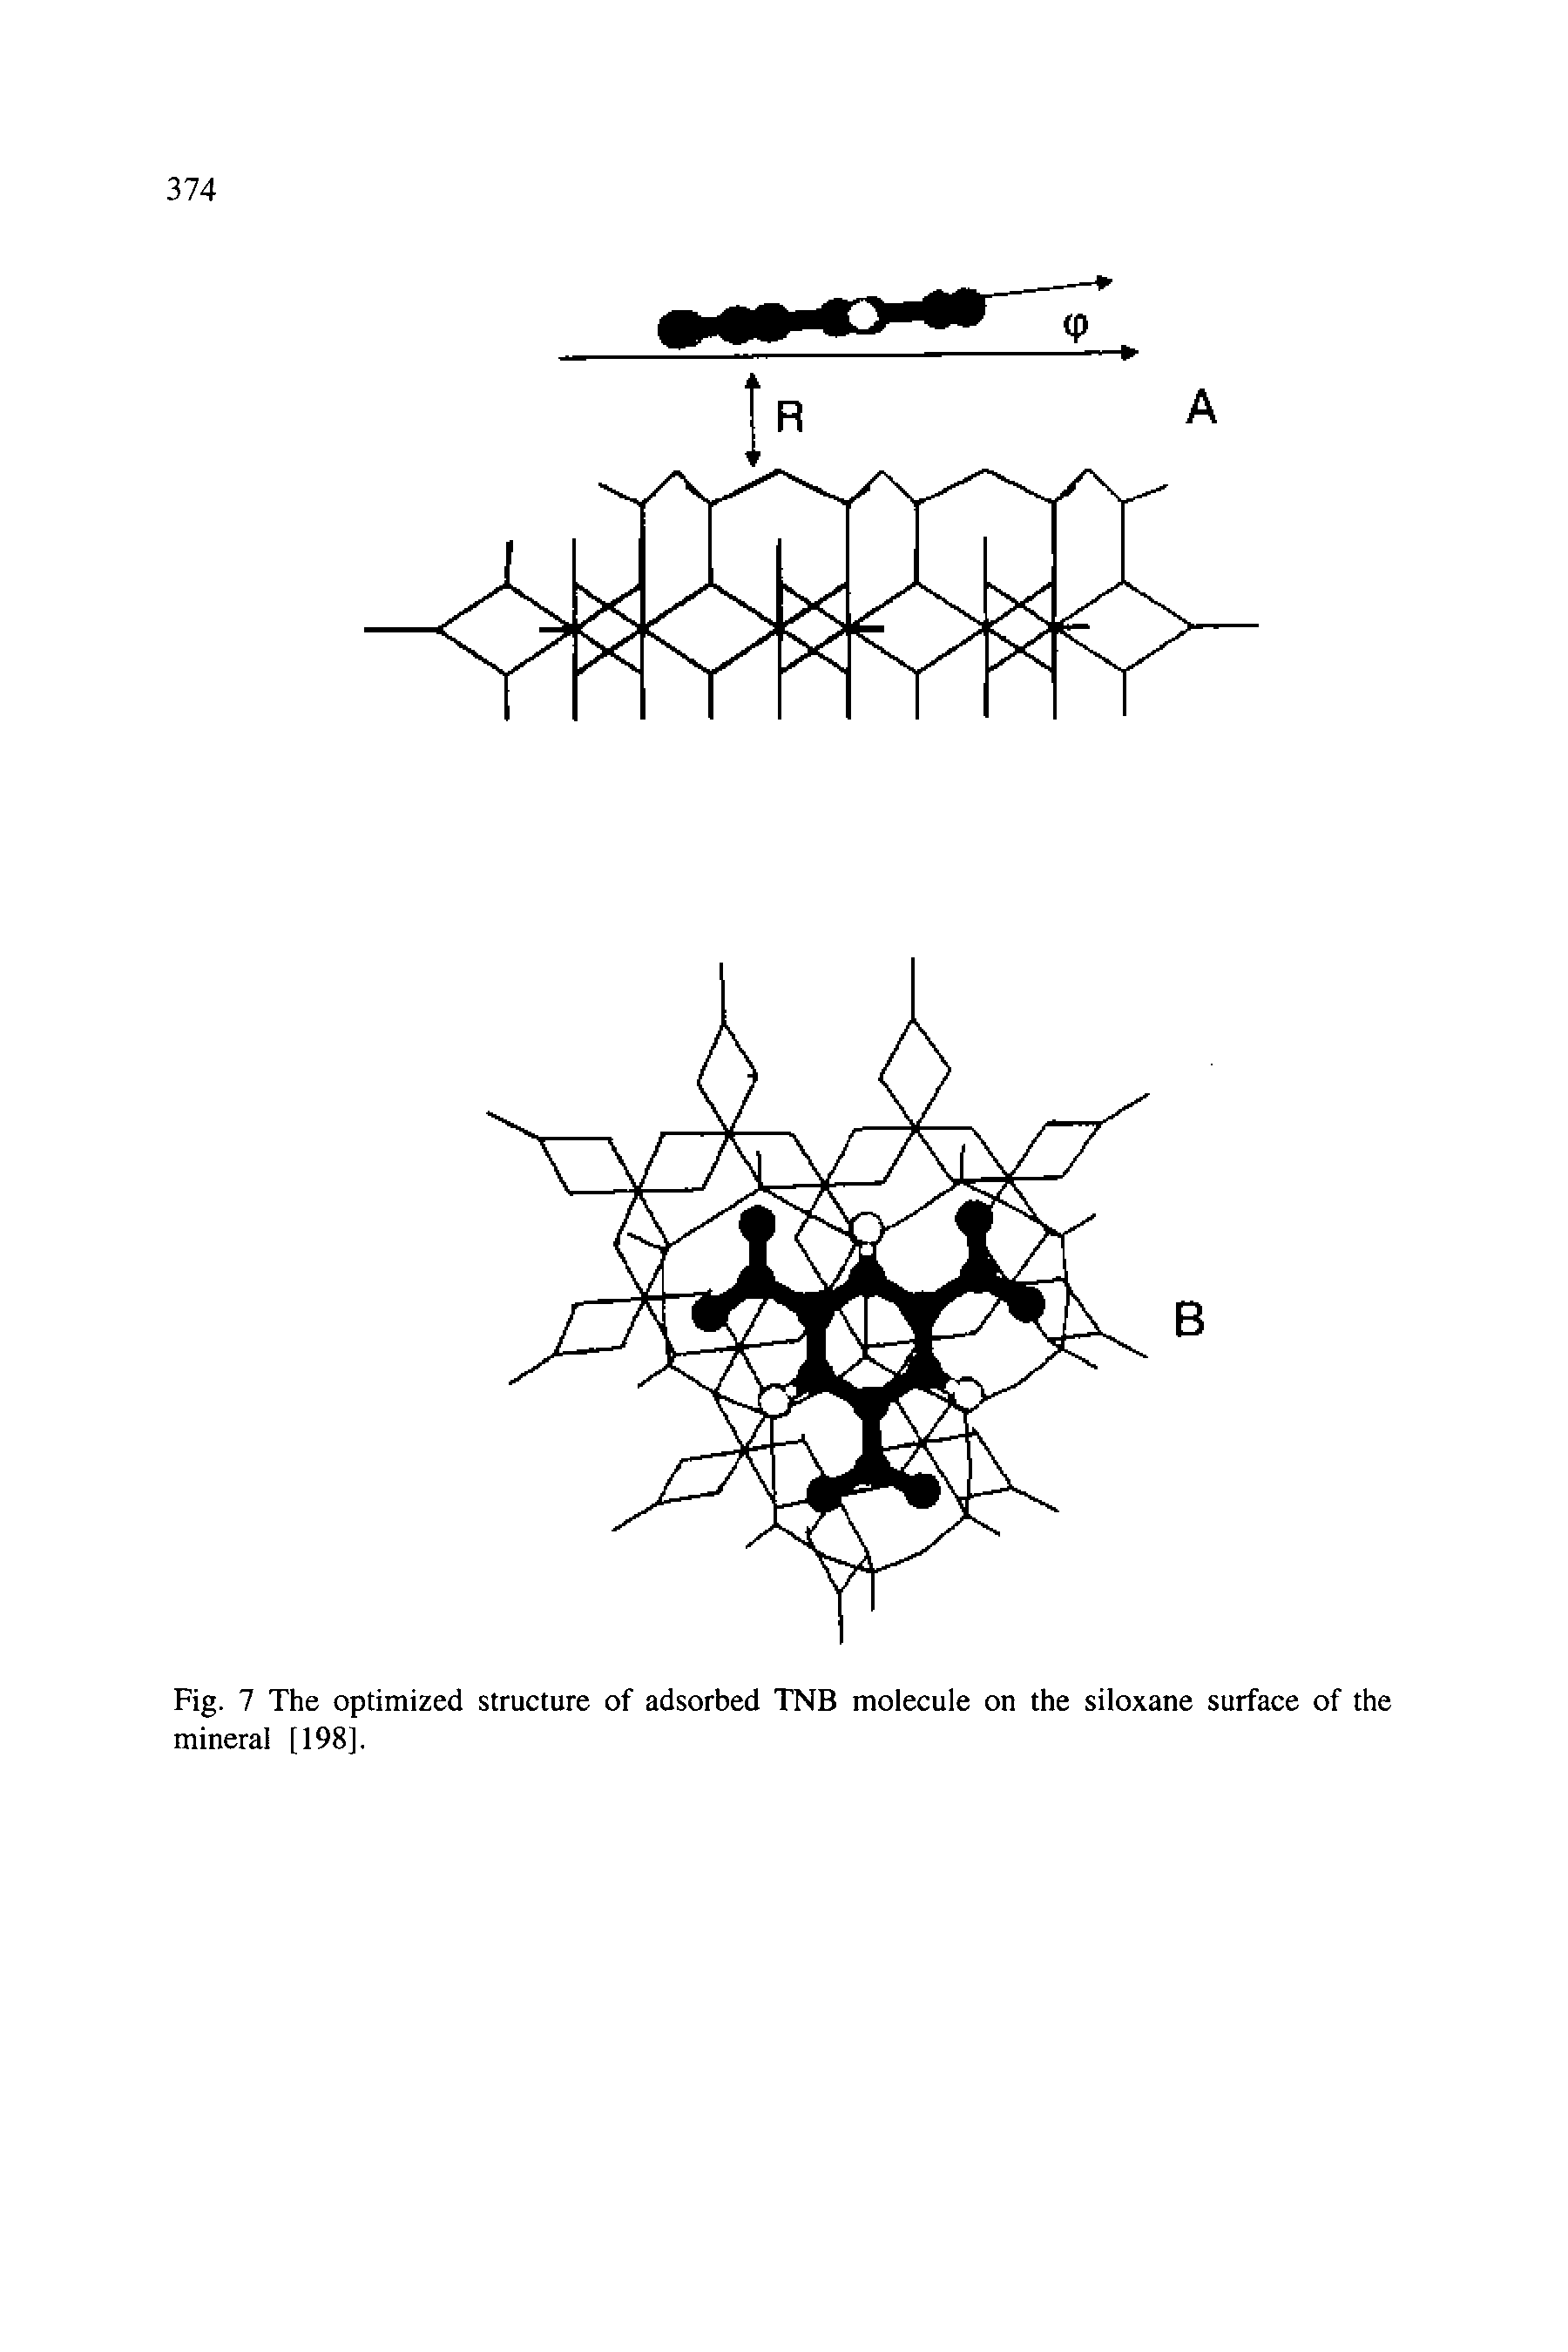 Fig. 7 The optimized structure of adsorbed TNB molecule on the siloxane surface of the mineral [198].